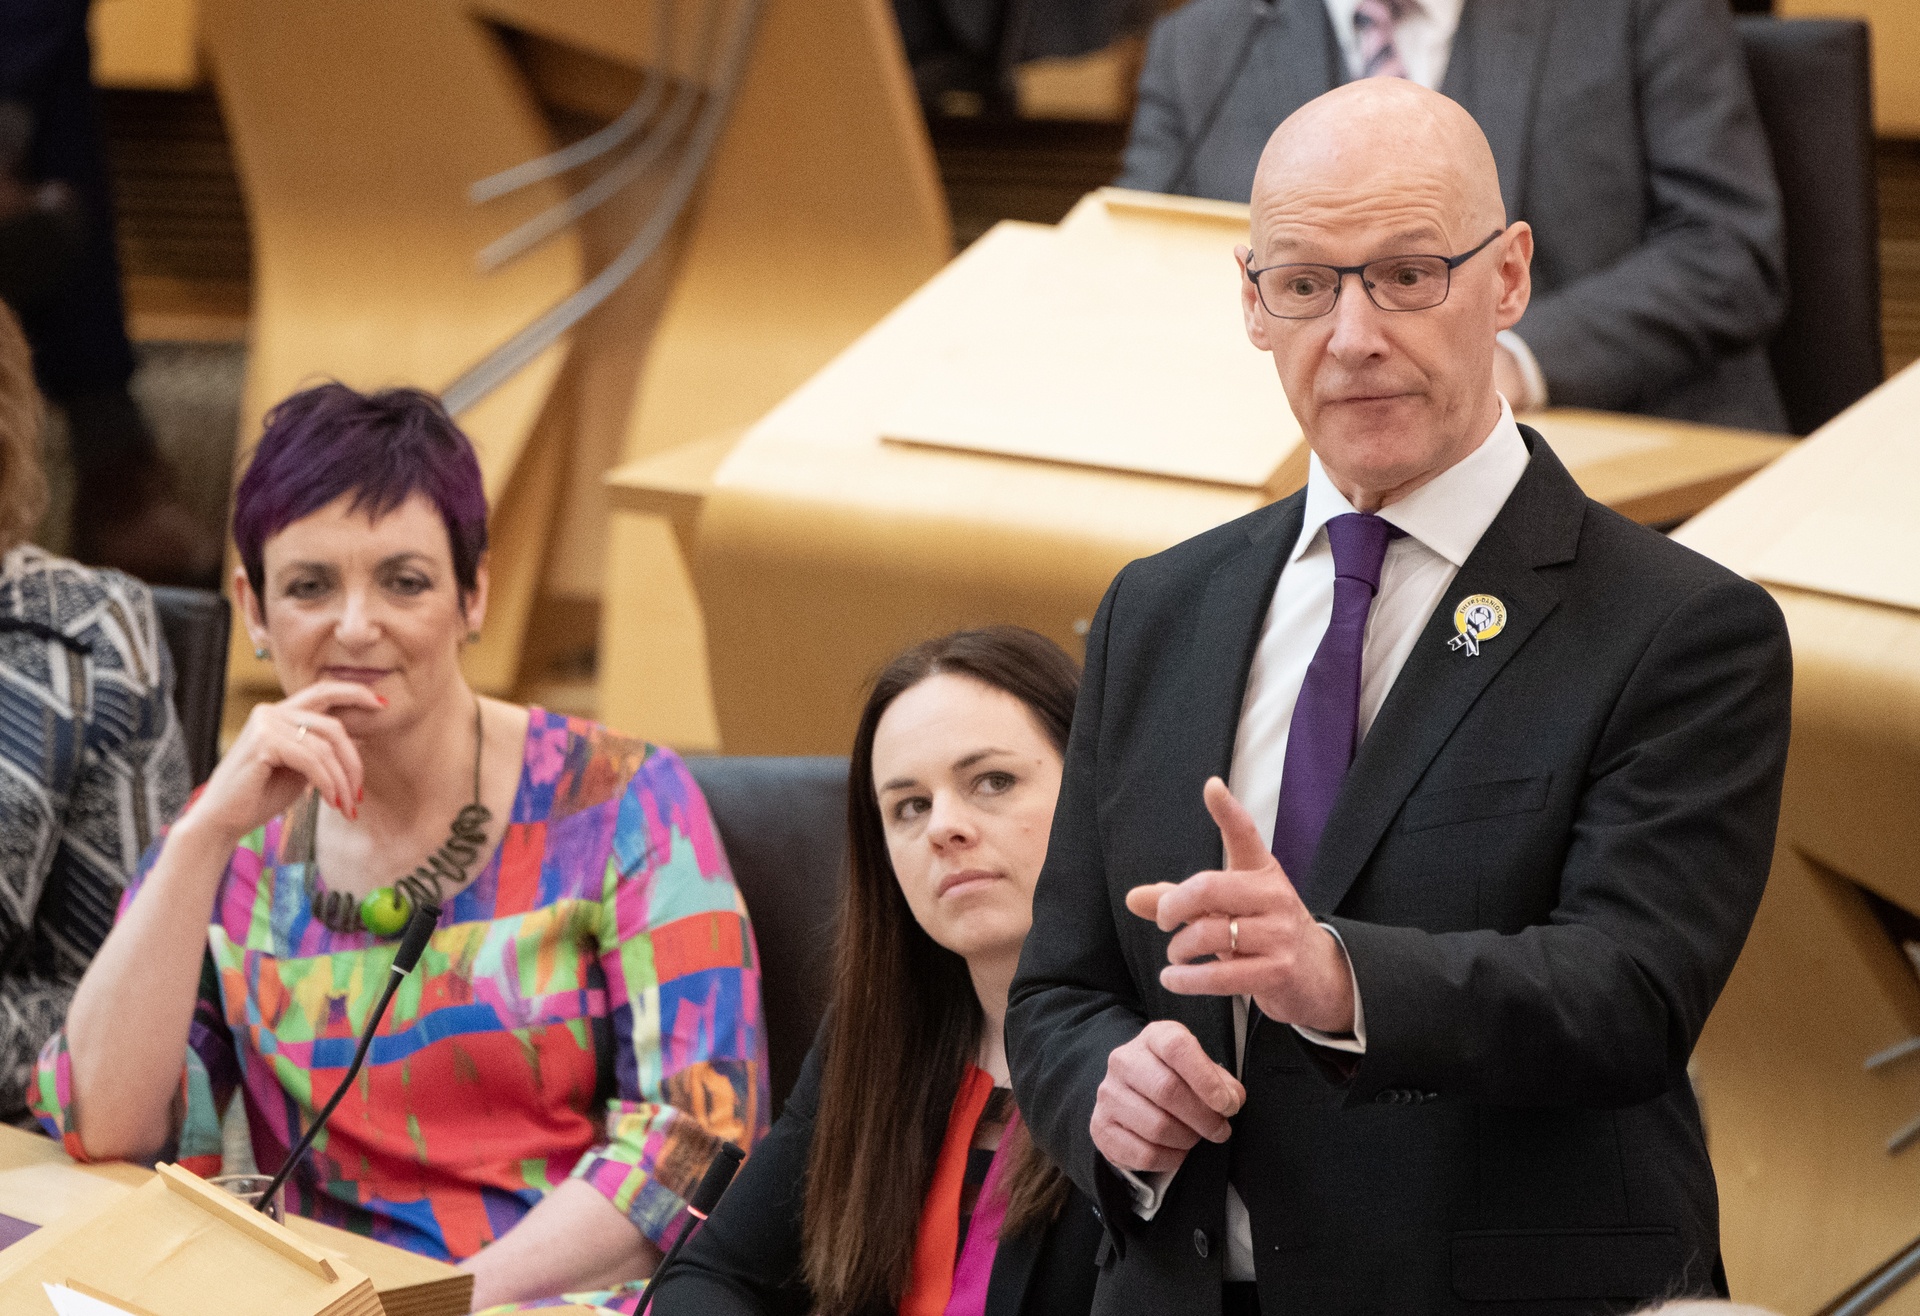 John Swinney during his debut First Minister’s Questions as First Minister on May 9.